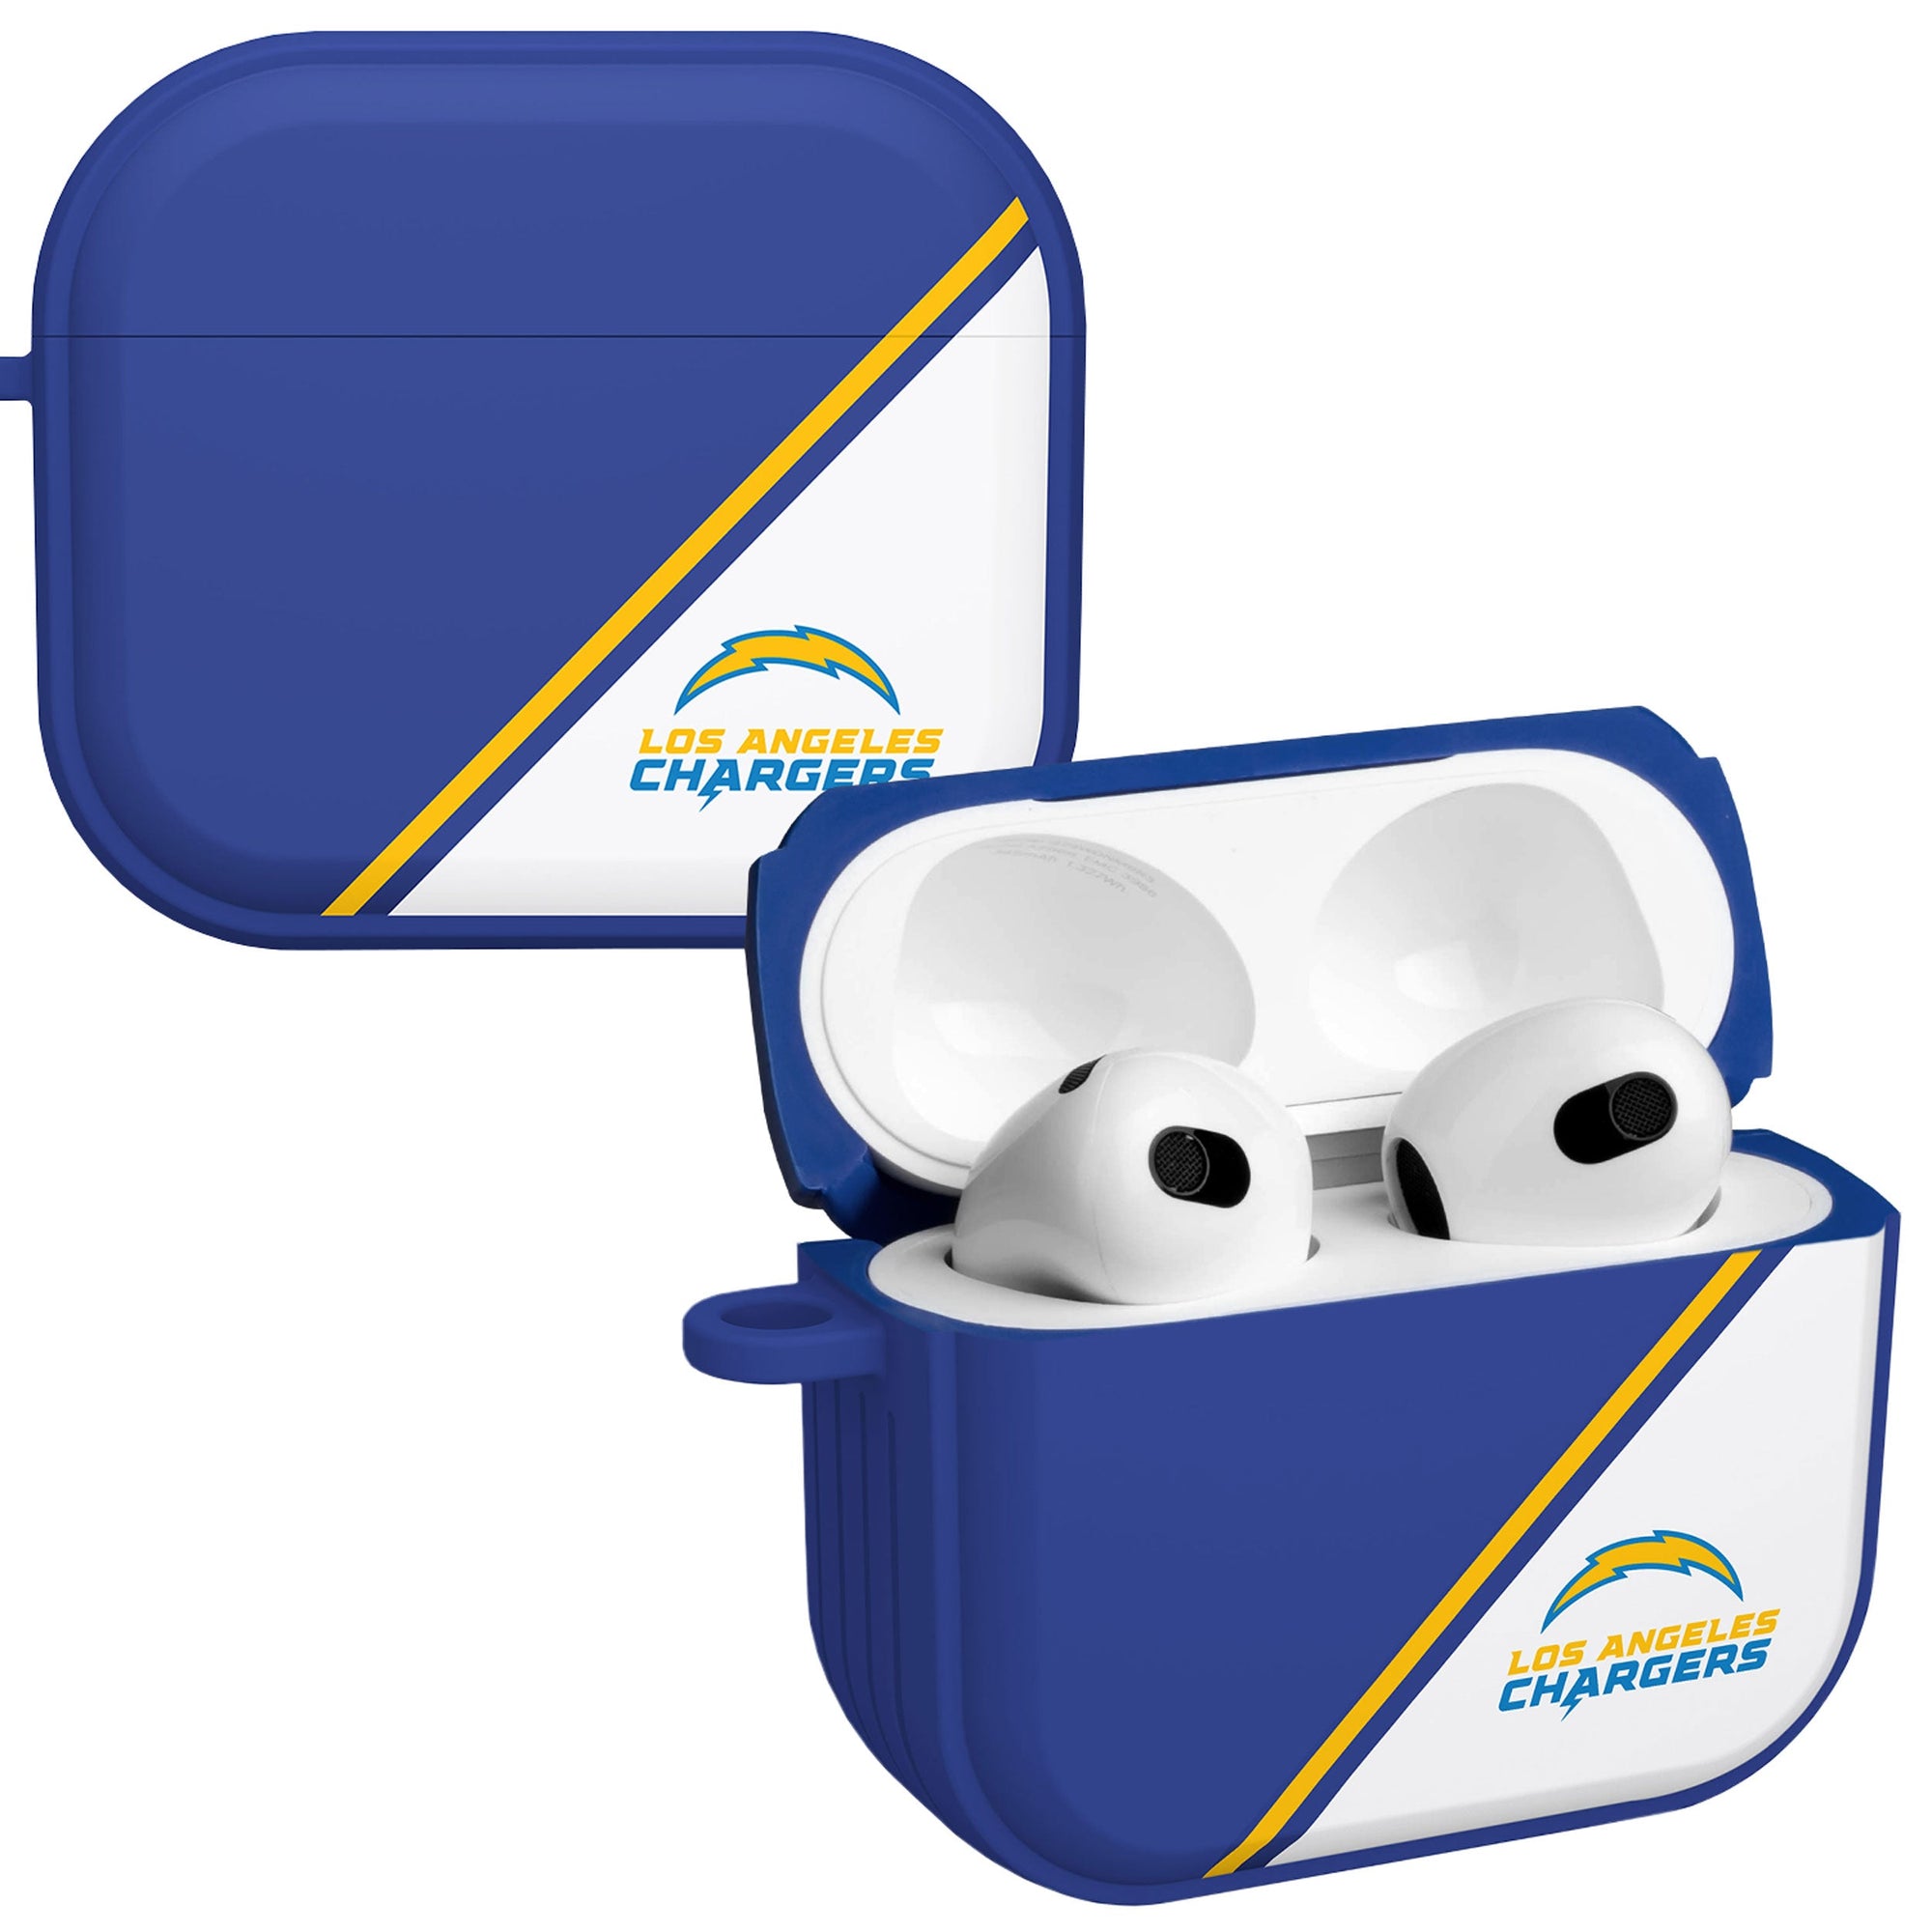 Los Angeles Chargers HDX Champion Series Apple AirPods Gen 3 Case Cover